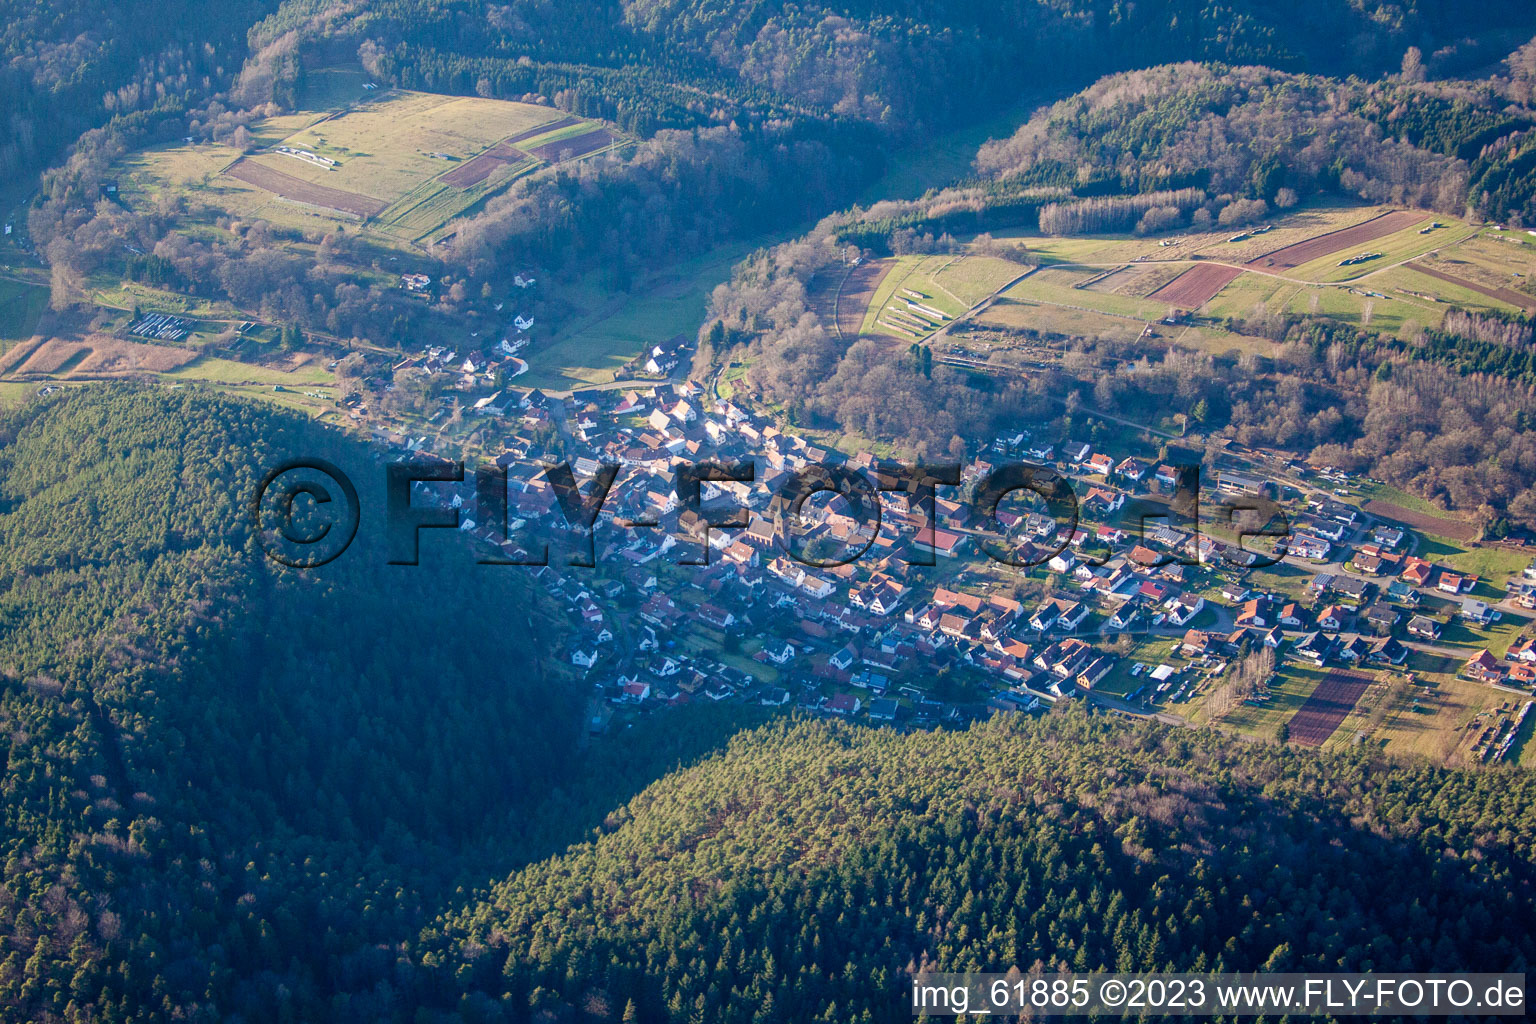 Vorderweidenthal in the state Rhineland-Palatinate, Germany from the drone perspective